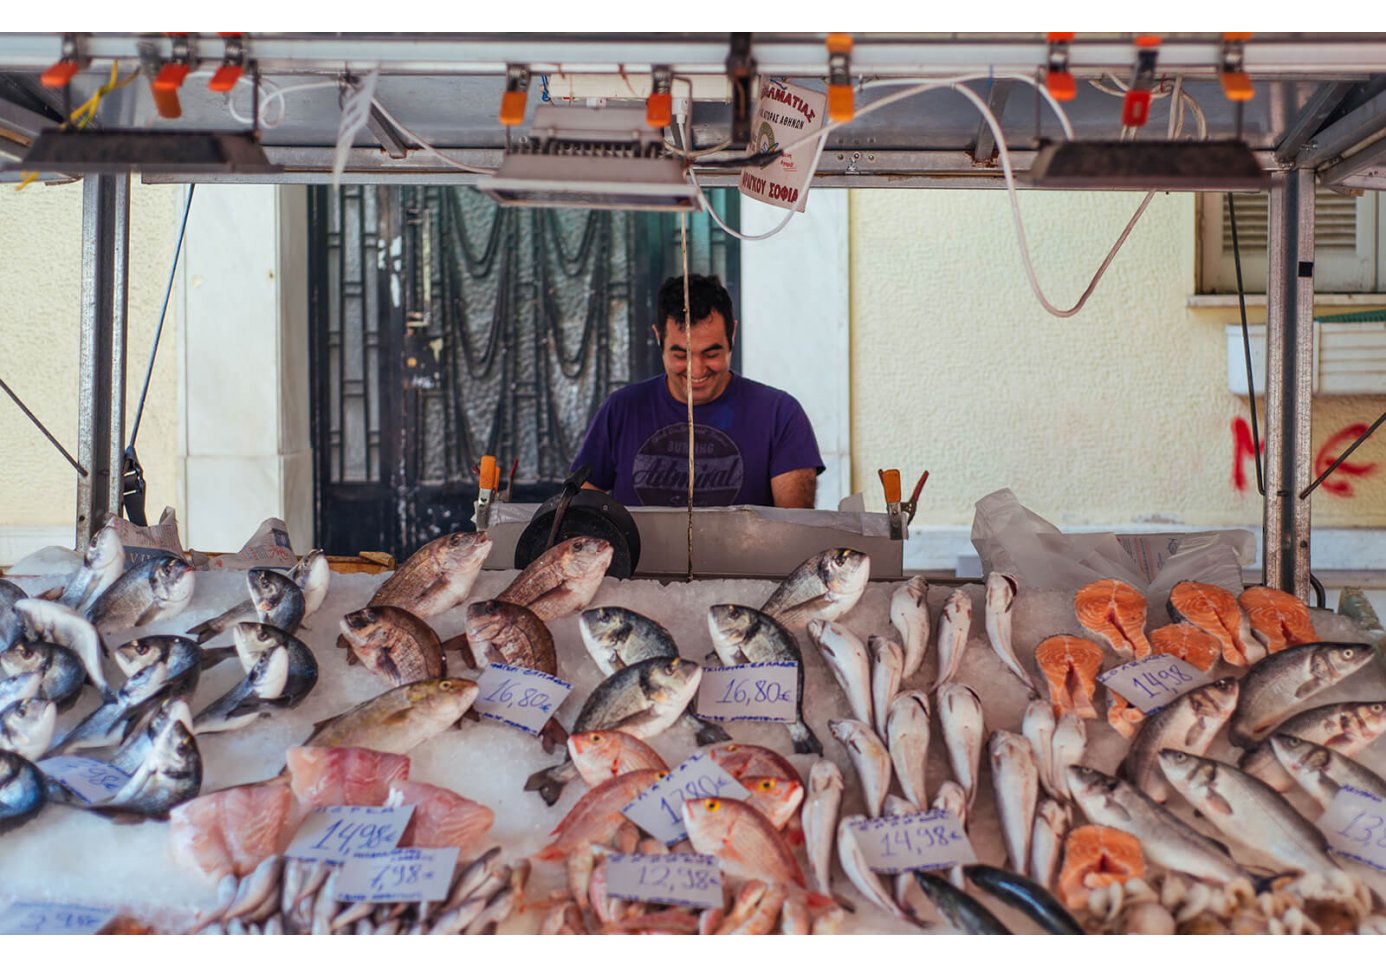 a man selling fish on a counter.